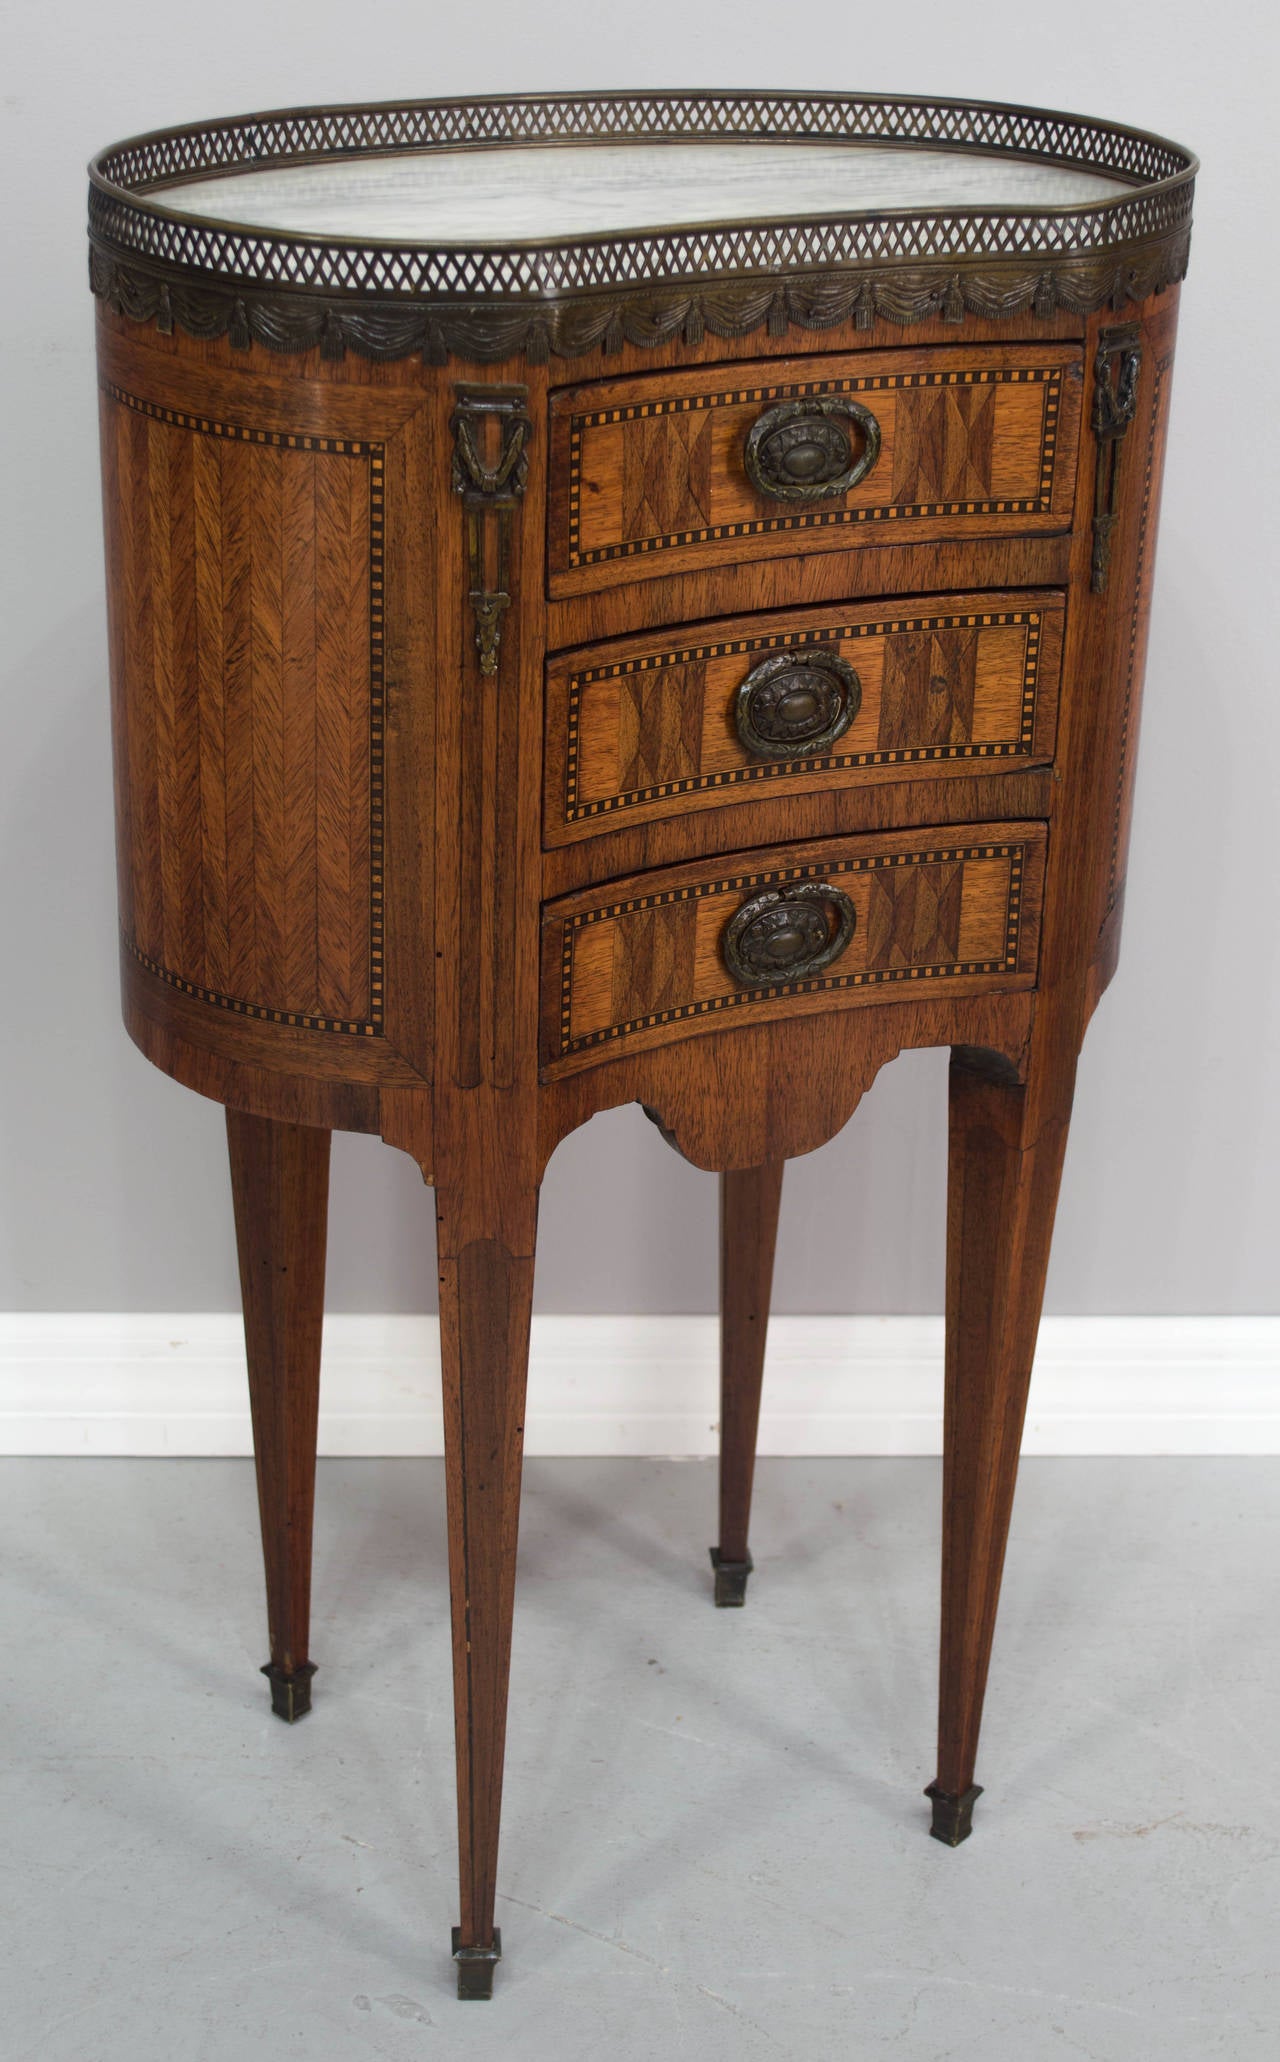 19th century French Louis XVI style marquetry side table in an unusual kidney shape with slender tapered legs. Made of veneer of mahogany and walnut with three dovetailed drawers, marble top surrounded by bronze gallery. Original patinated bronze